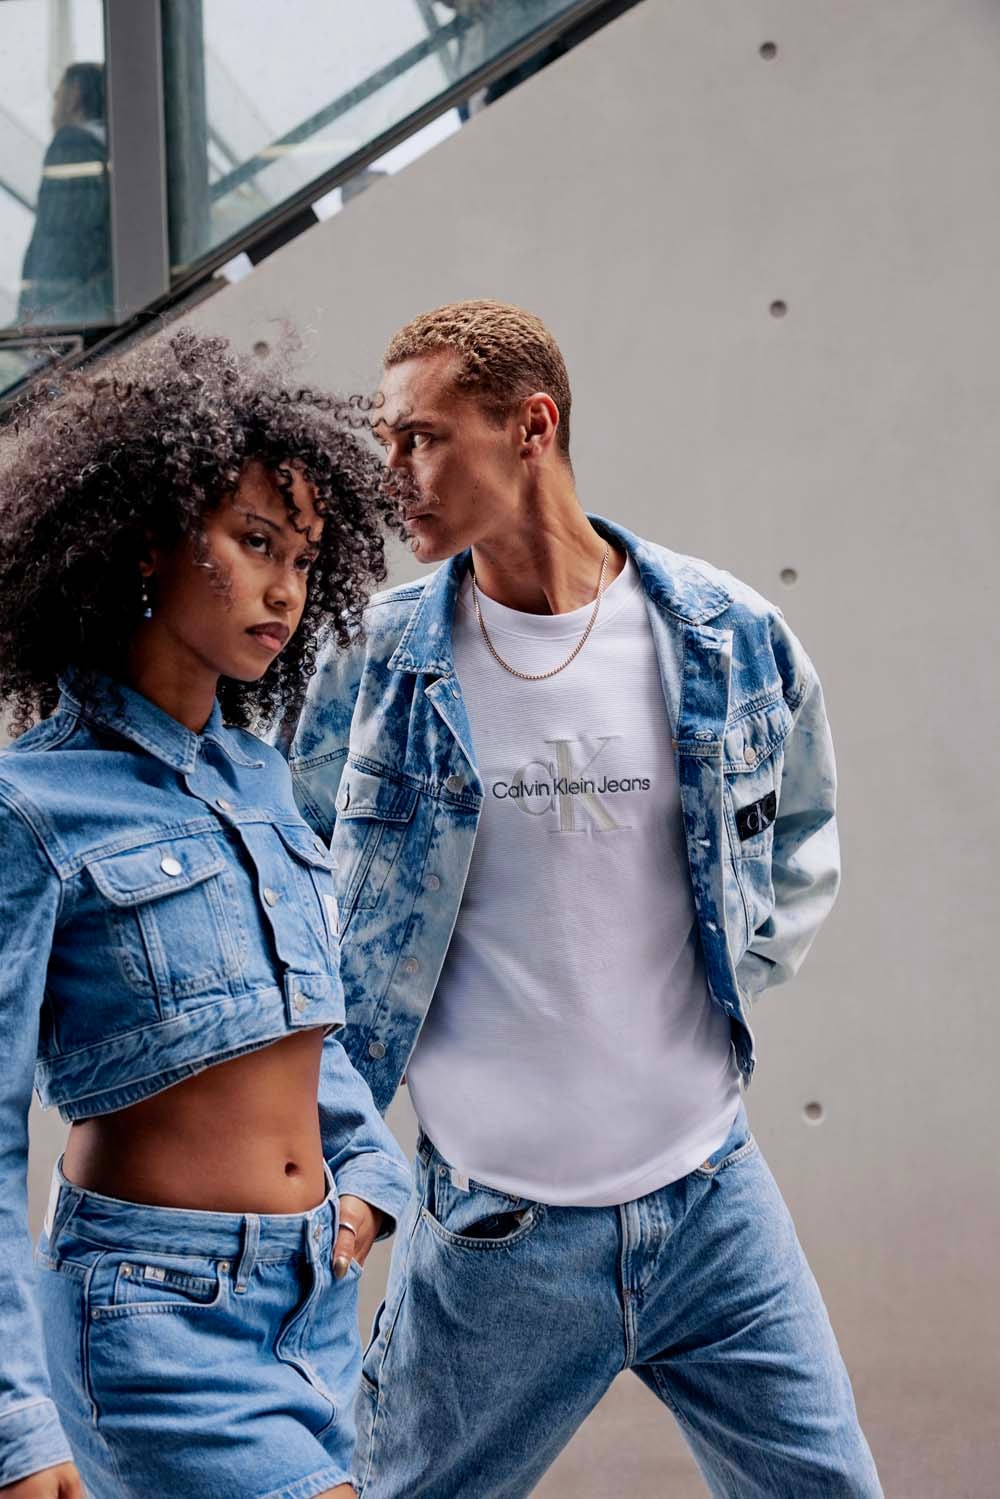 Calvin Klein launches Fall 2023 Jeans campaign starring Bright